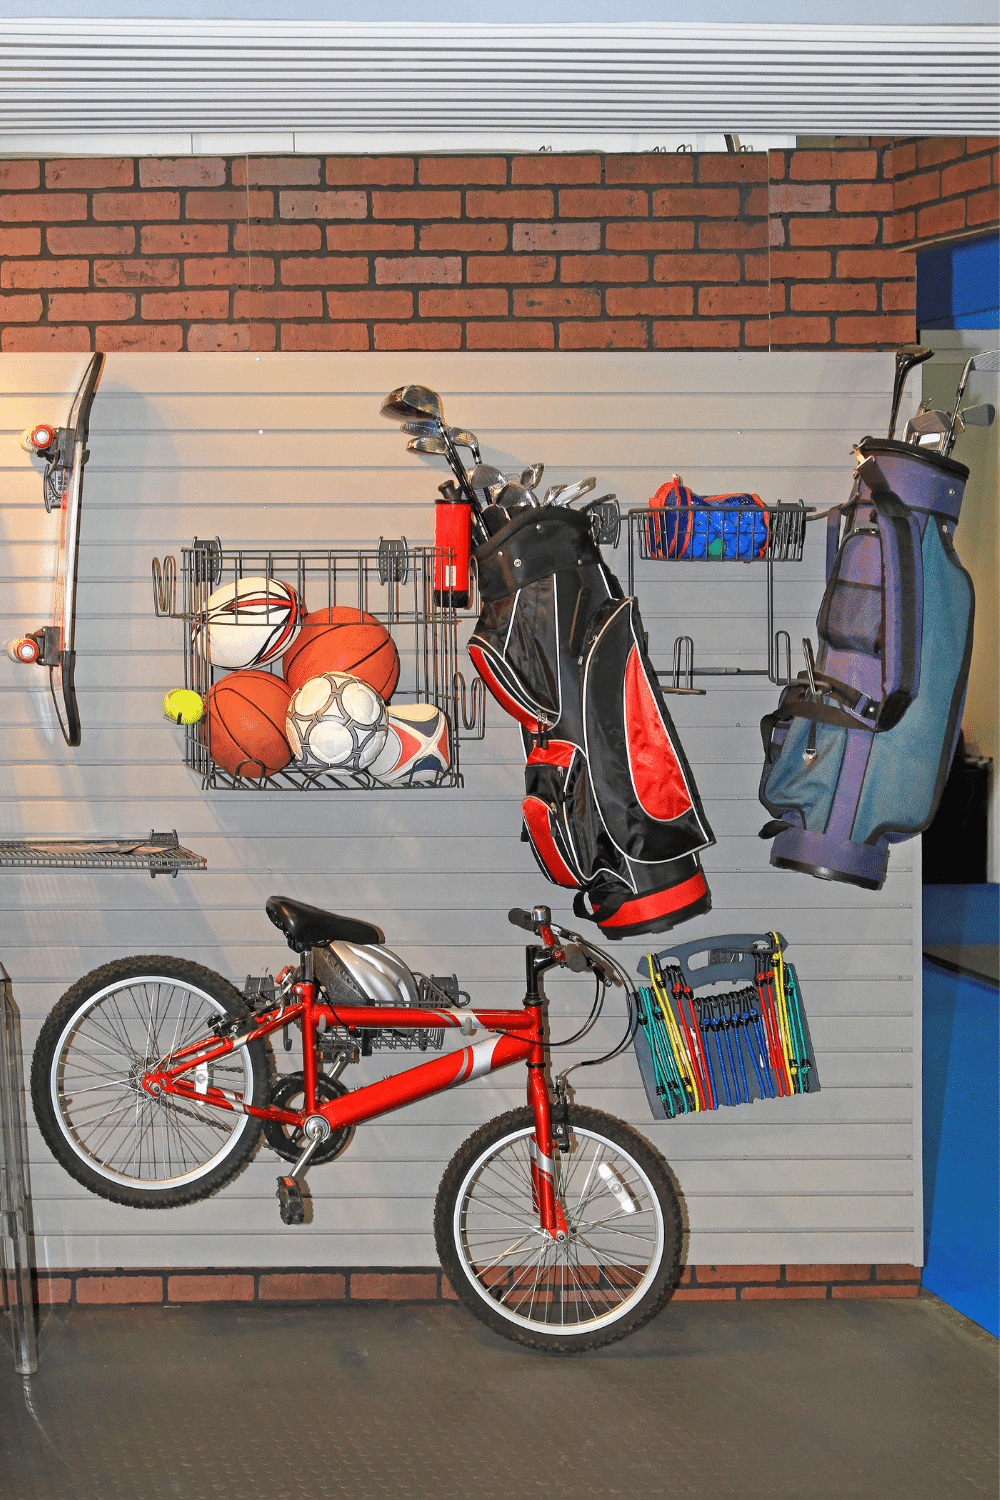 organized garage with items hanging on wall space